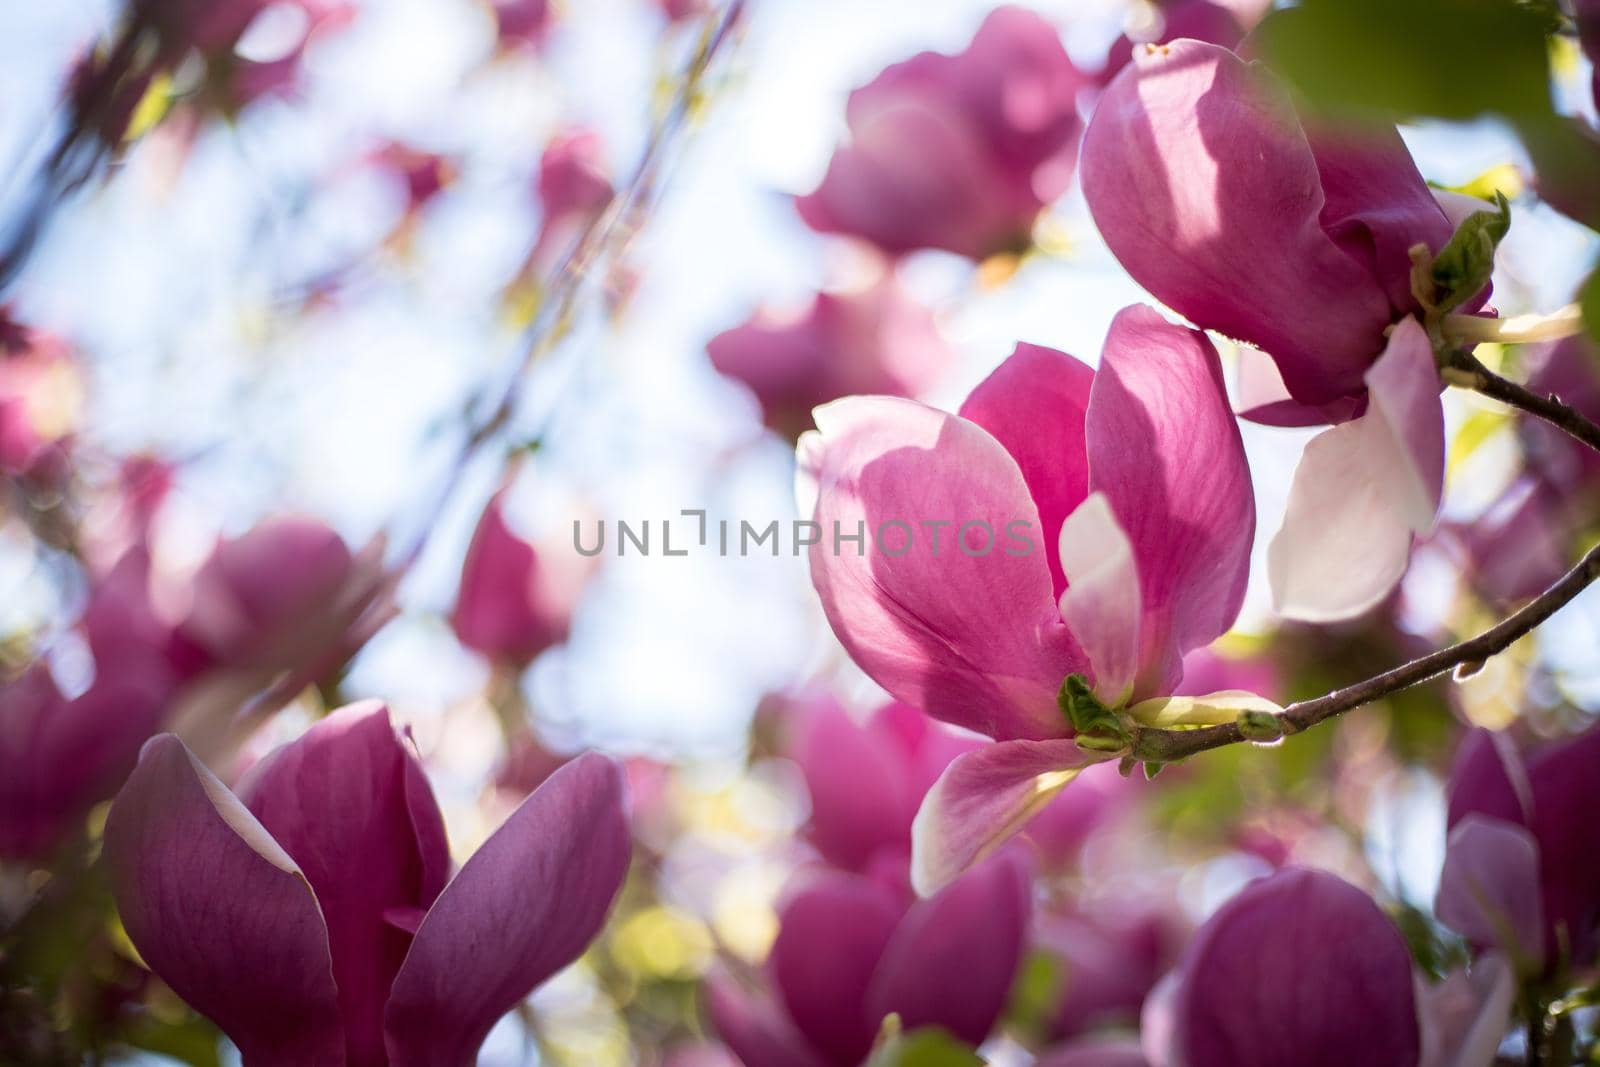 Springtime: Blooming tree with pink blossoms, beauty by Daxenbichler